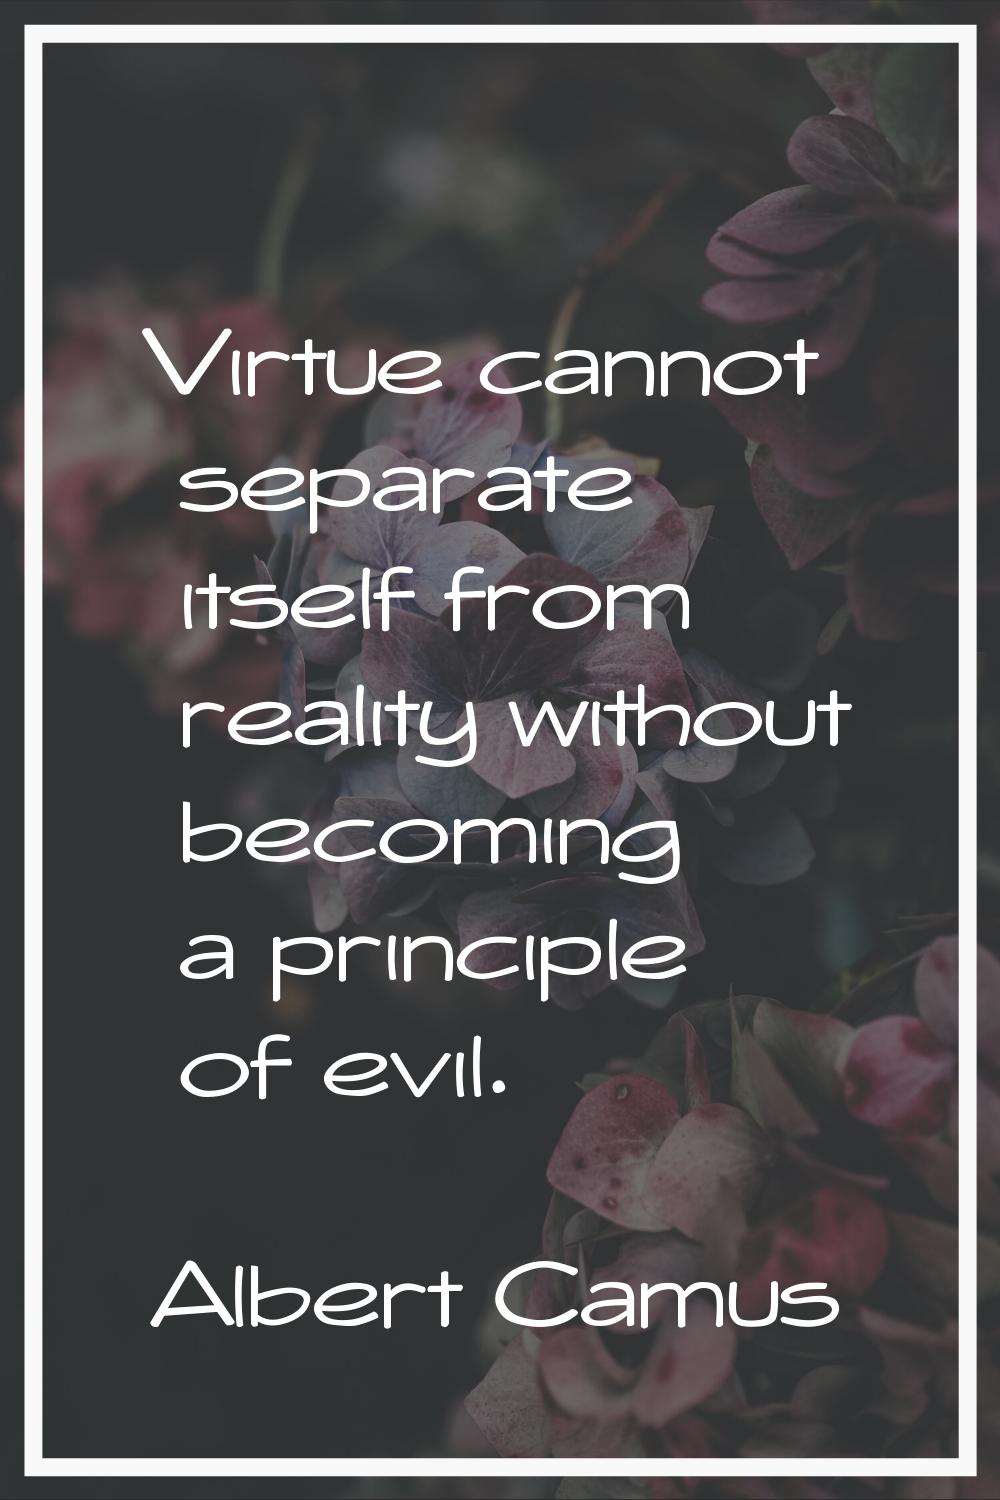 Virtue cannot separate itself from reality without becoming a principle of evil.